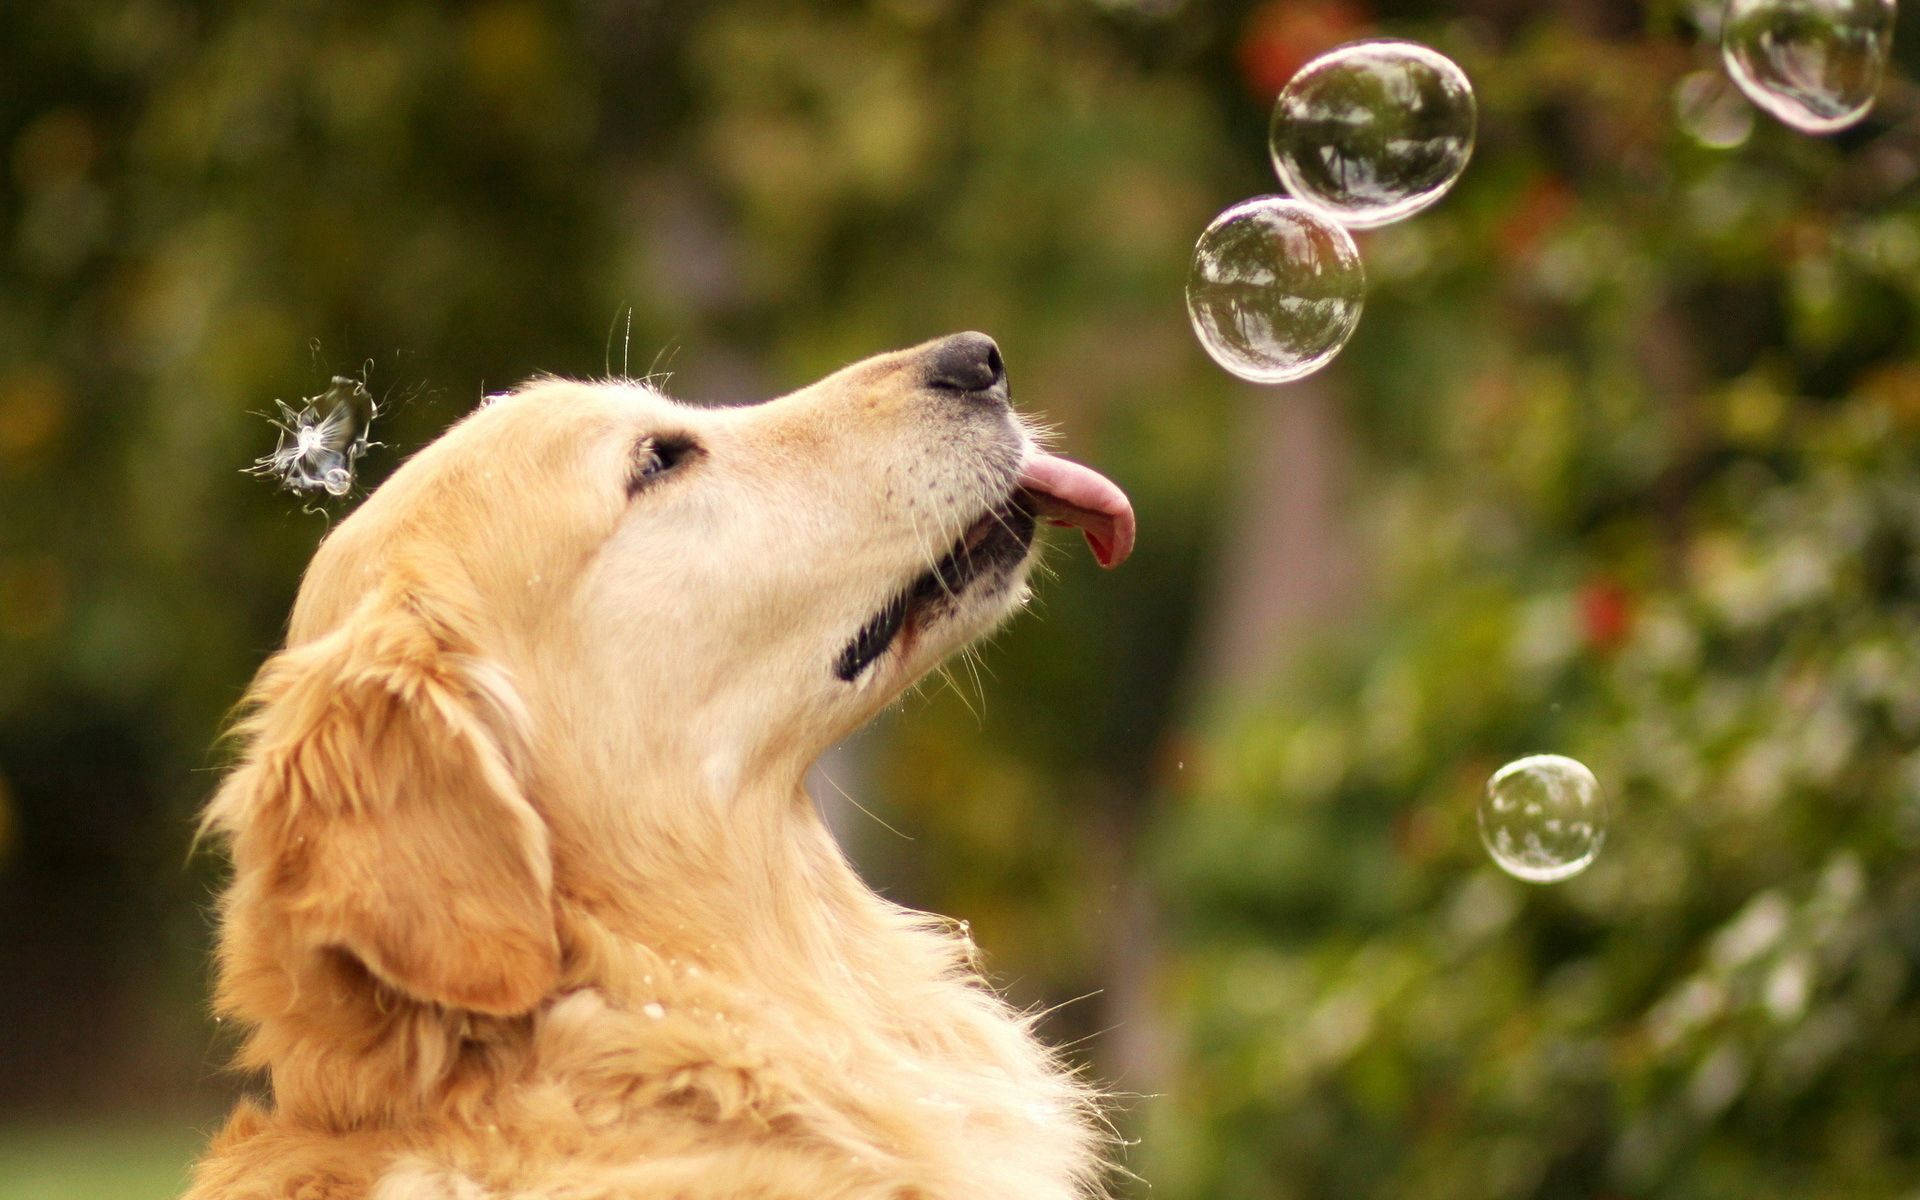 Cute Golden Retriever dog playing with bubbles in the garden wallpaper